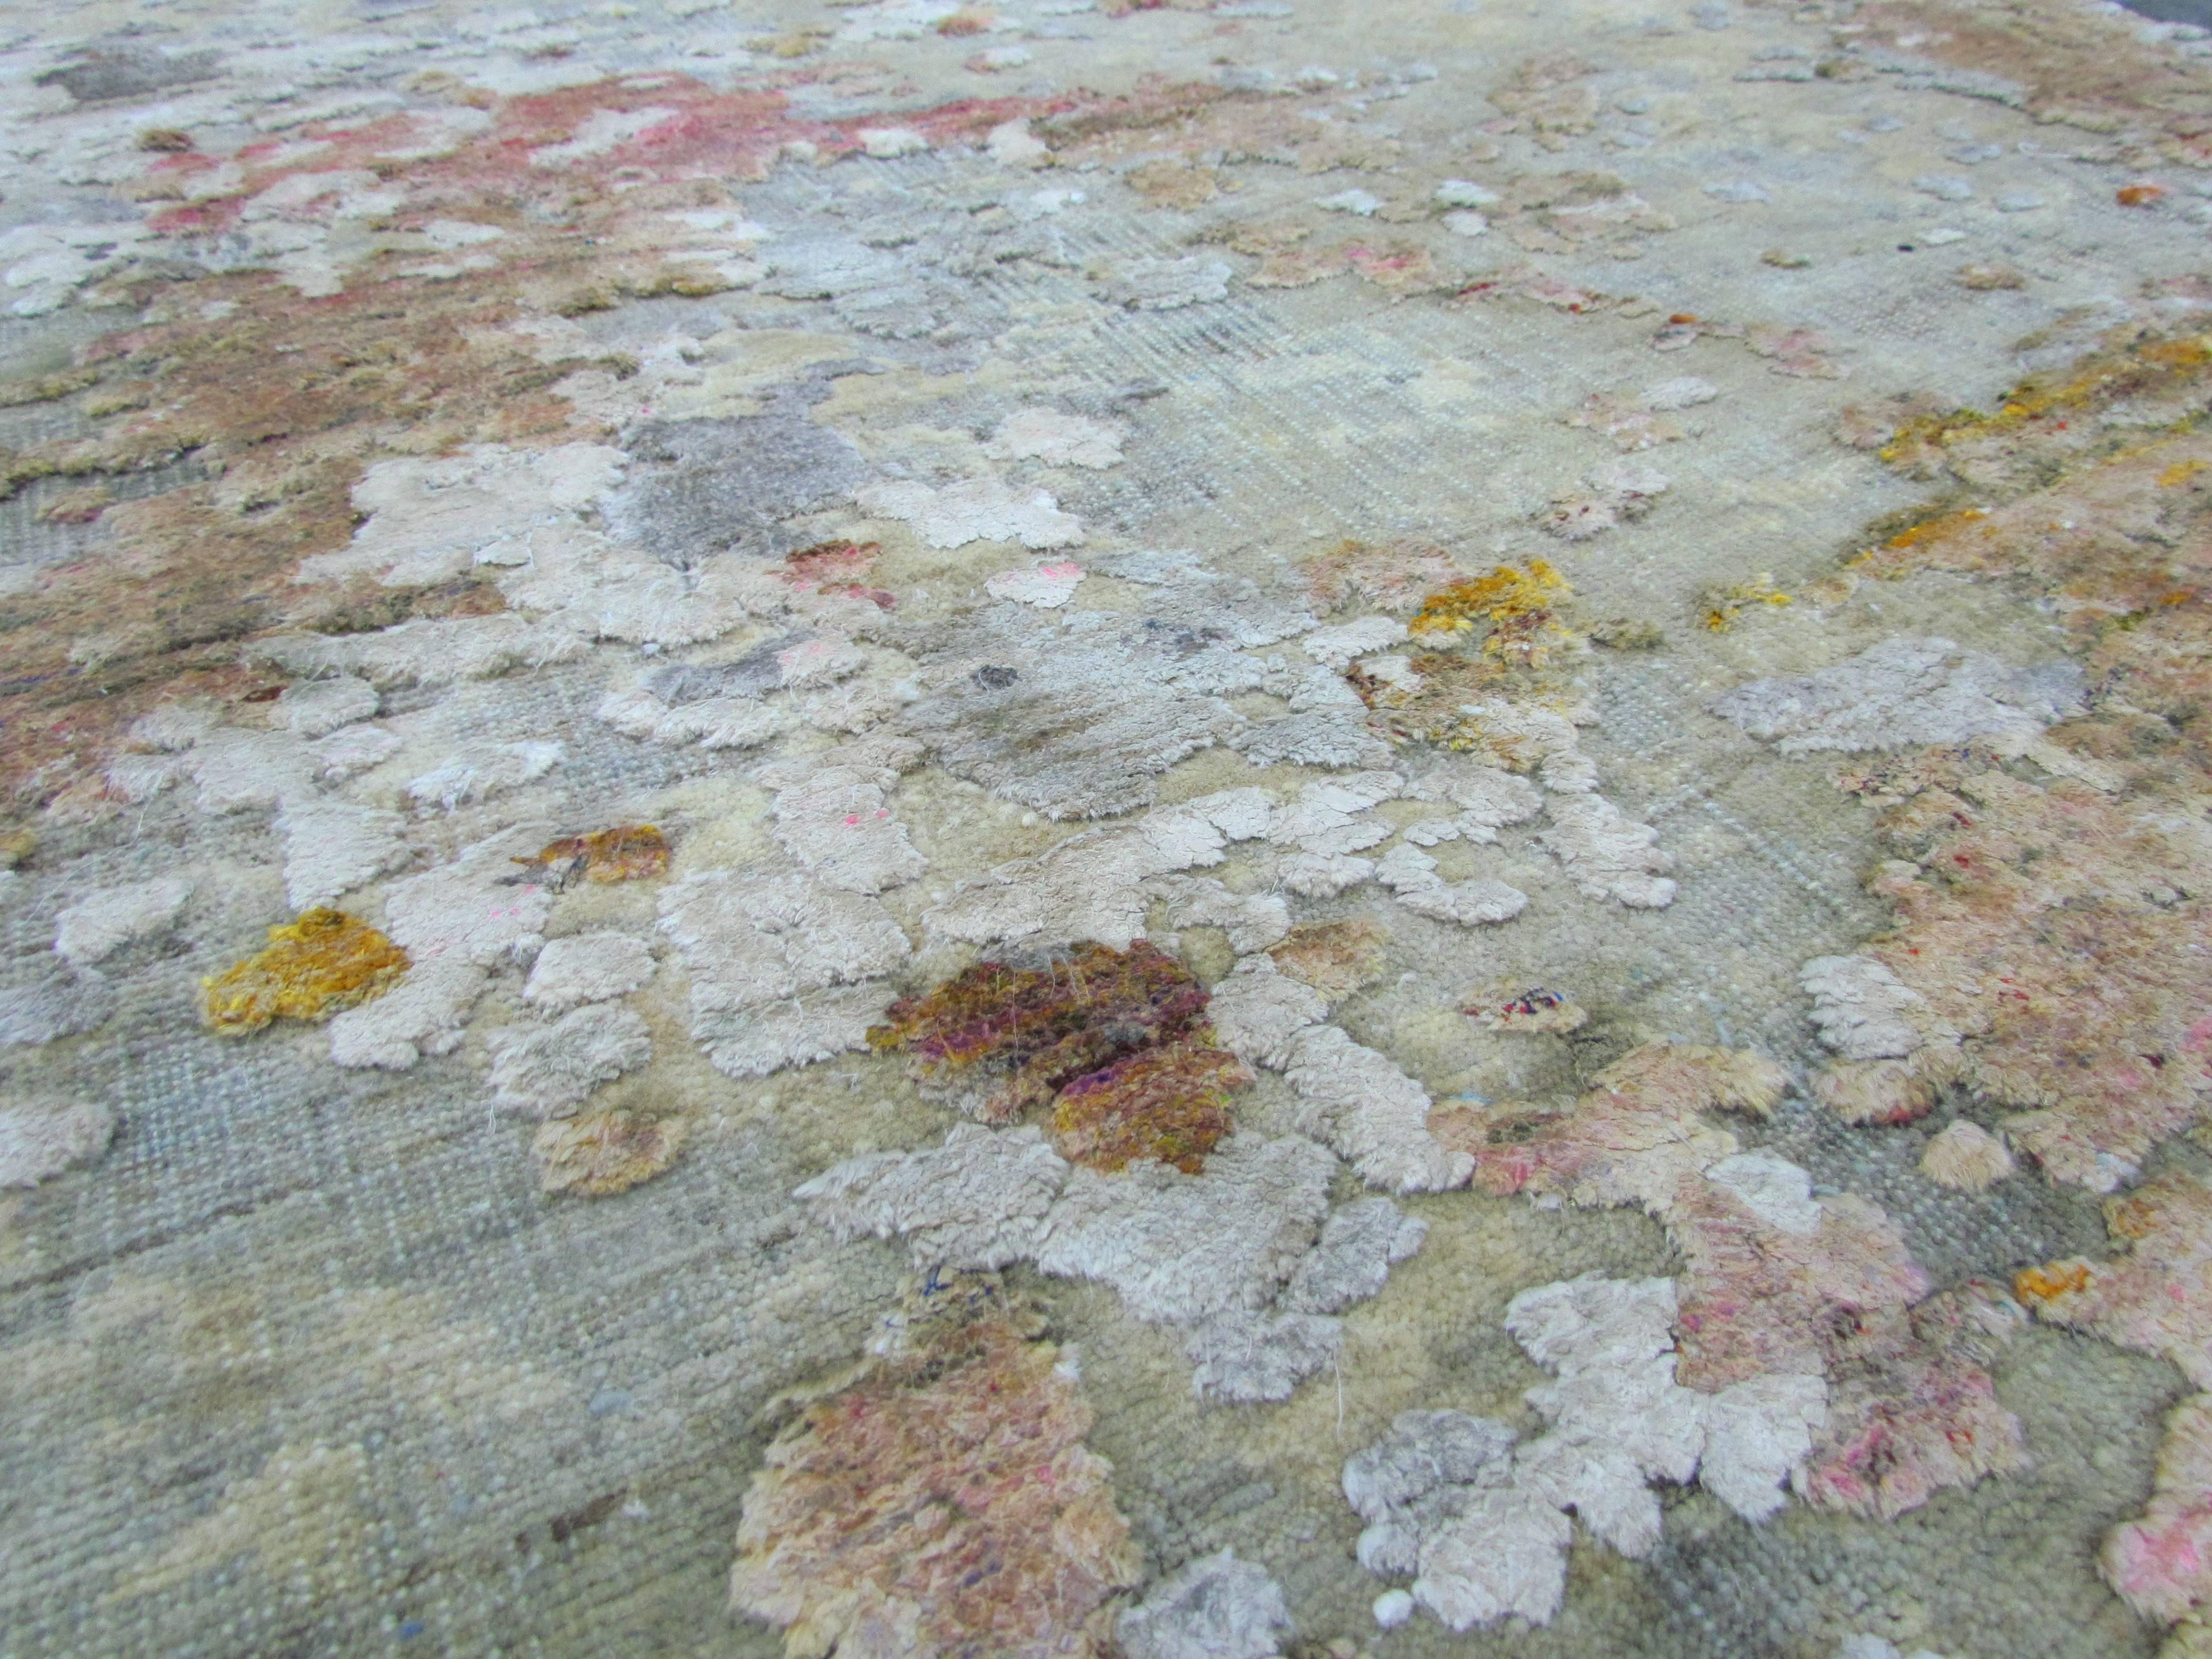 The Odyssey Collection A breakthrough, three dimensional and multi textural rug collection, inspired by NASA imagery. Distressed wool and natural silk are hand knotted to create three levels of visual and tactile finery. The collection pairs vintage